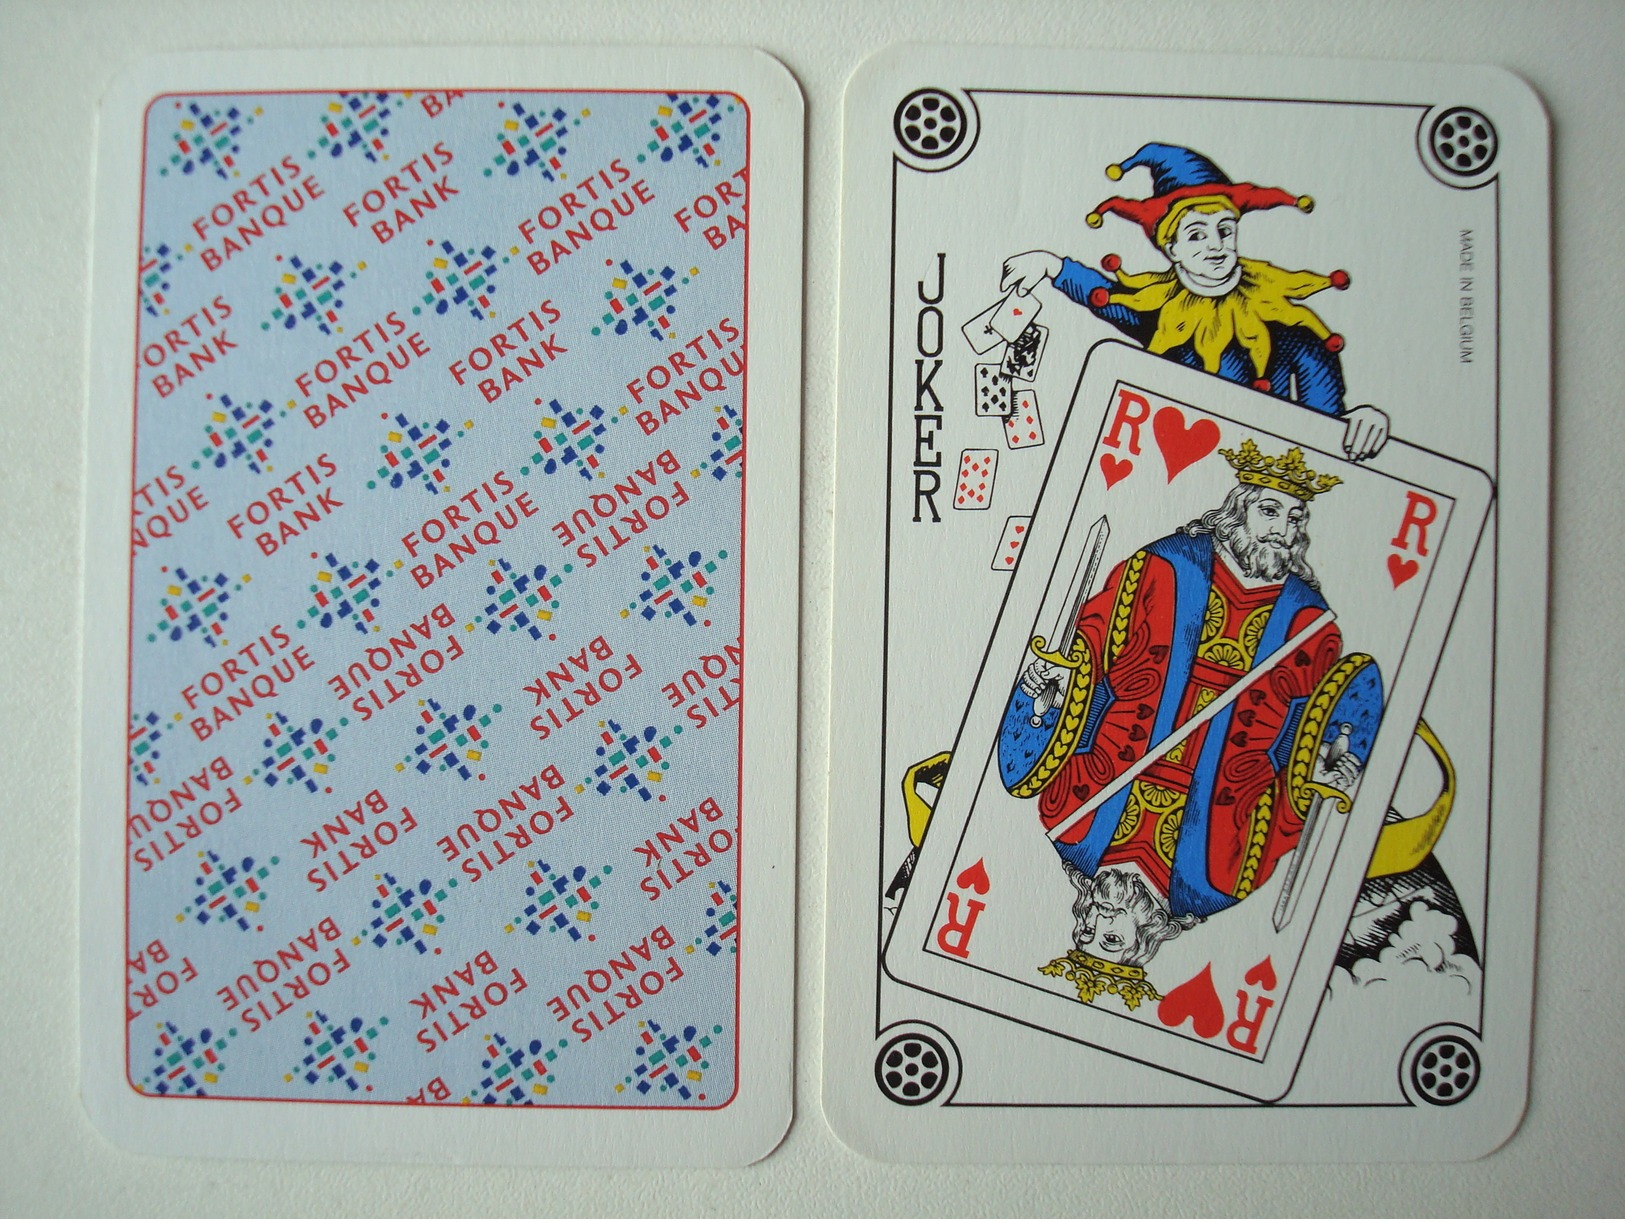 Fortis Bank Banque. - 2 Jokers Assortis. - Playing Cards (classic)